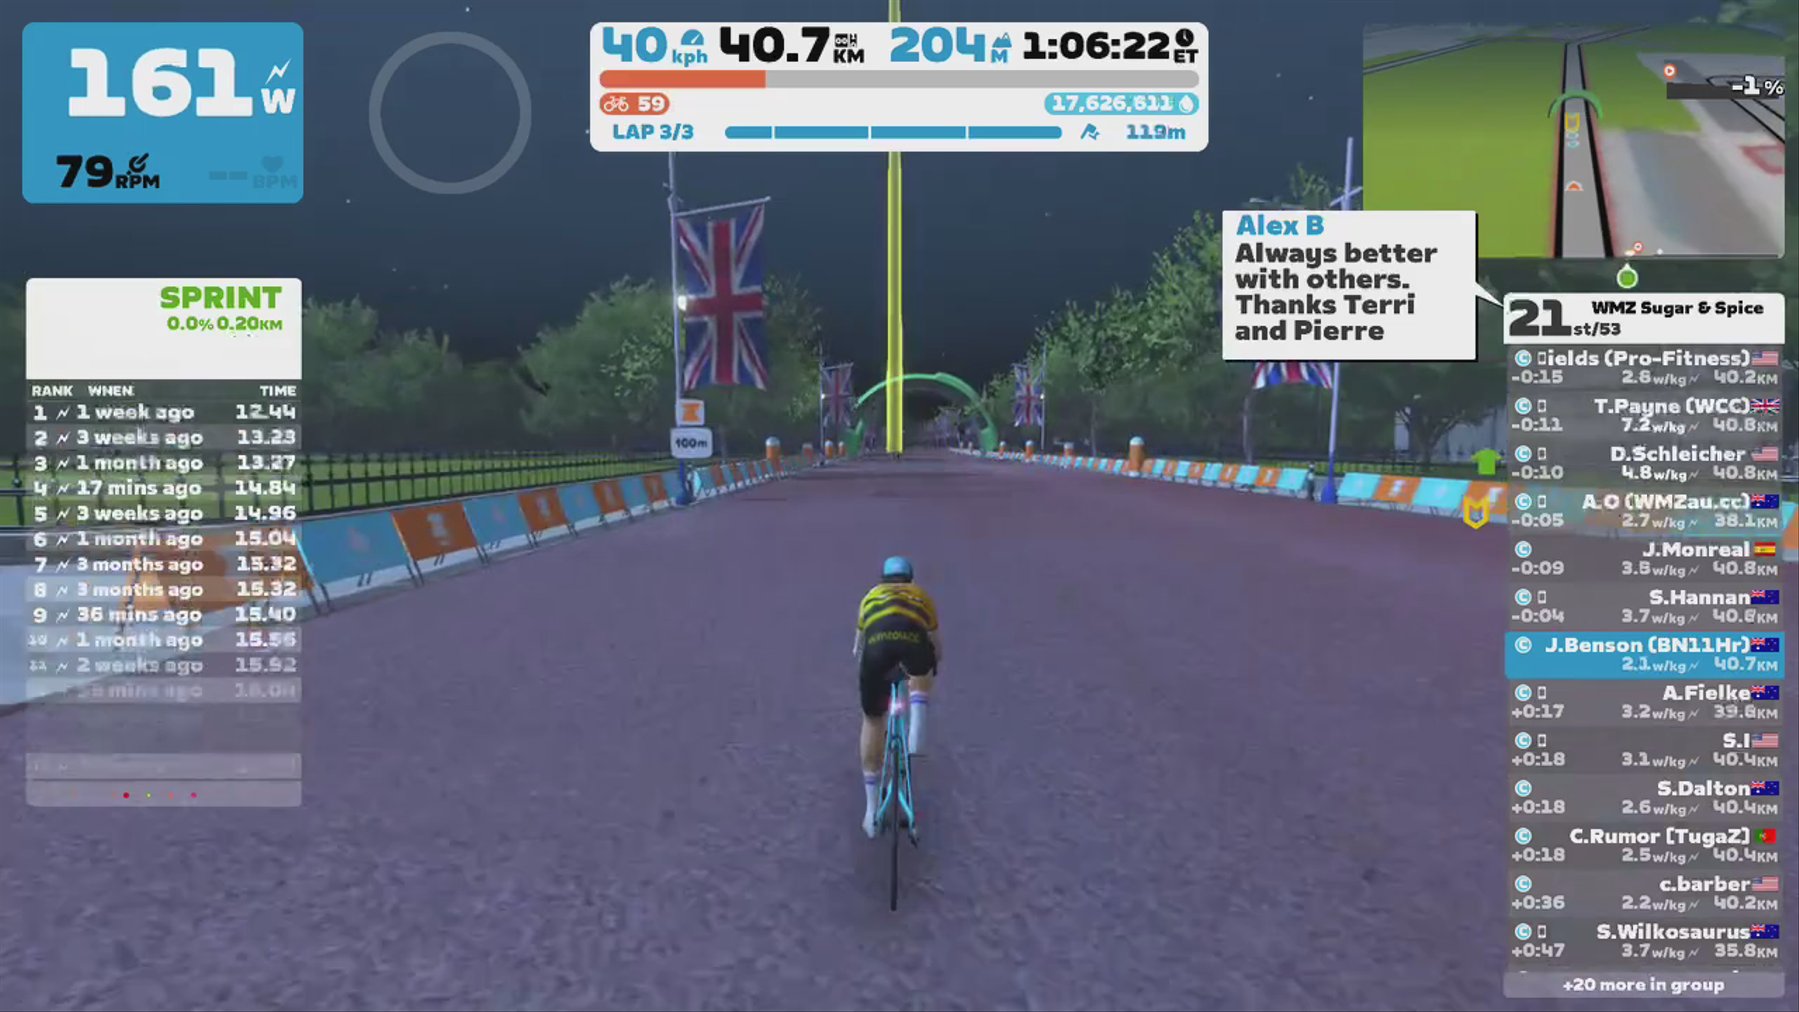 Zwift - Group Ride: WMZ Sugar & Spice (C) on Greater London Flat in London